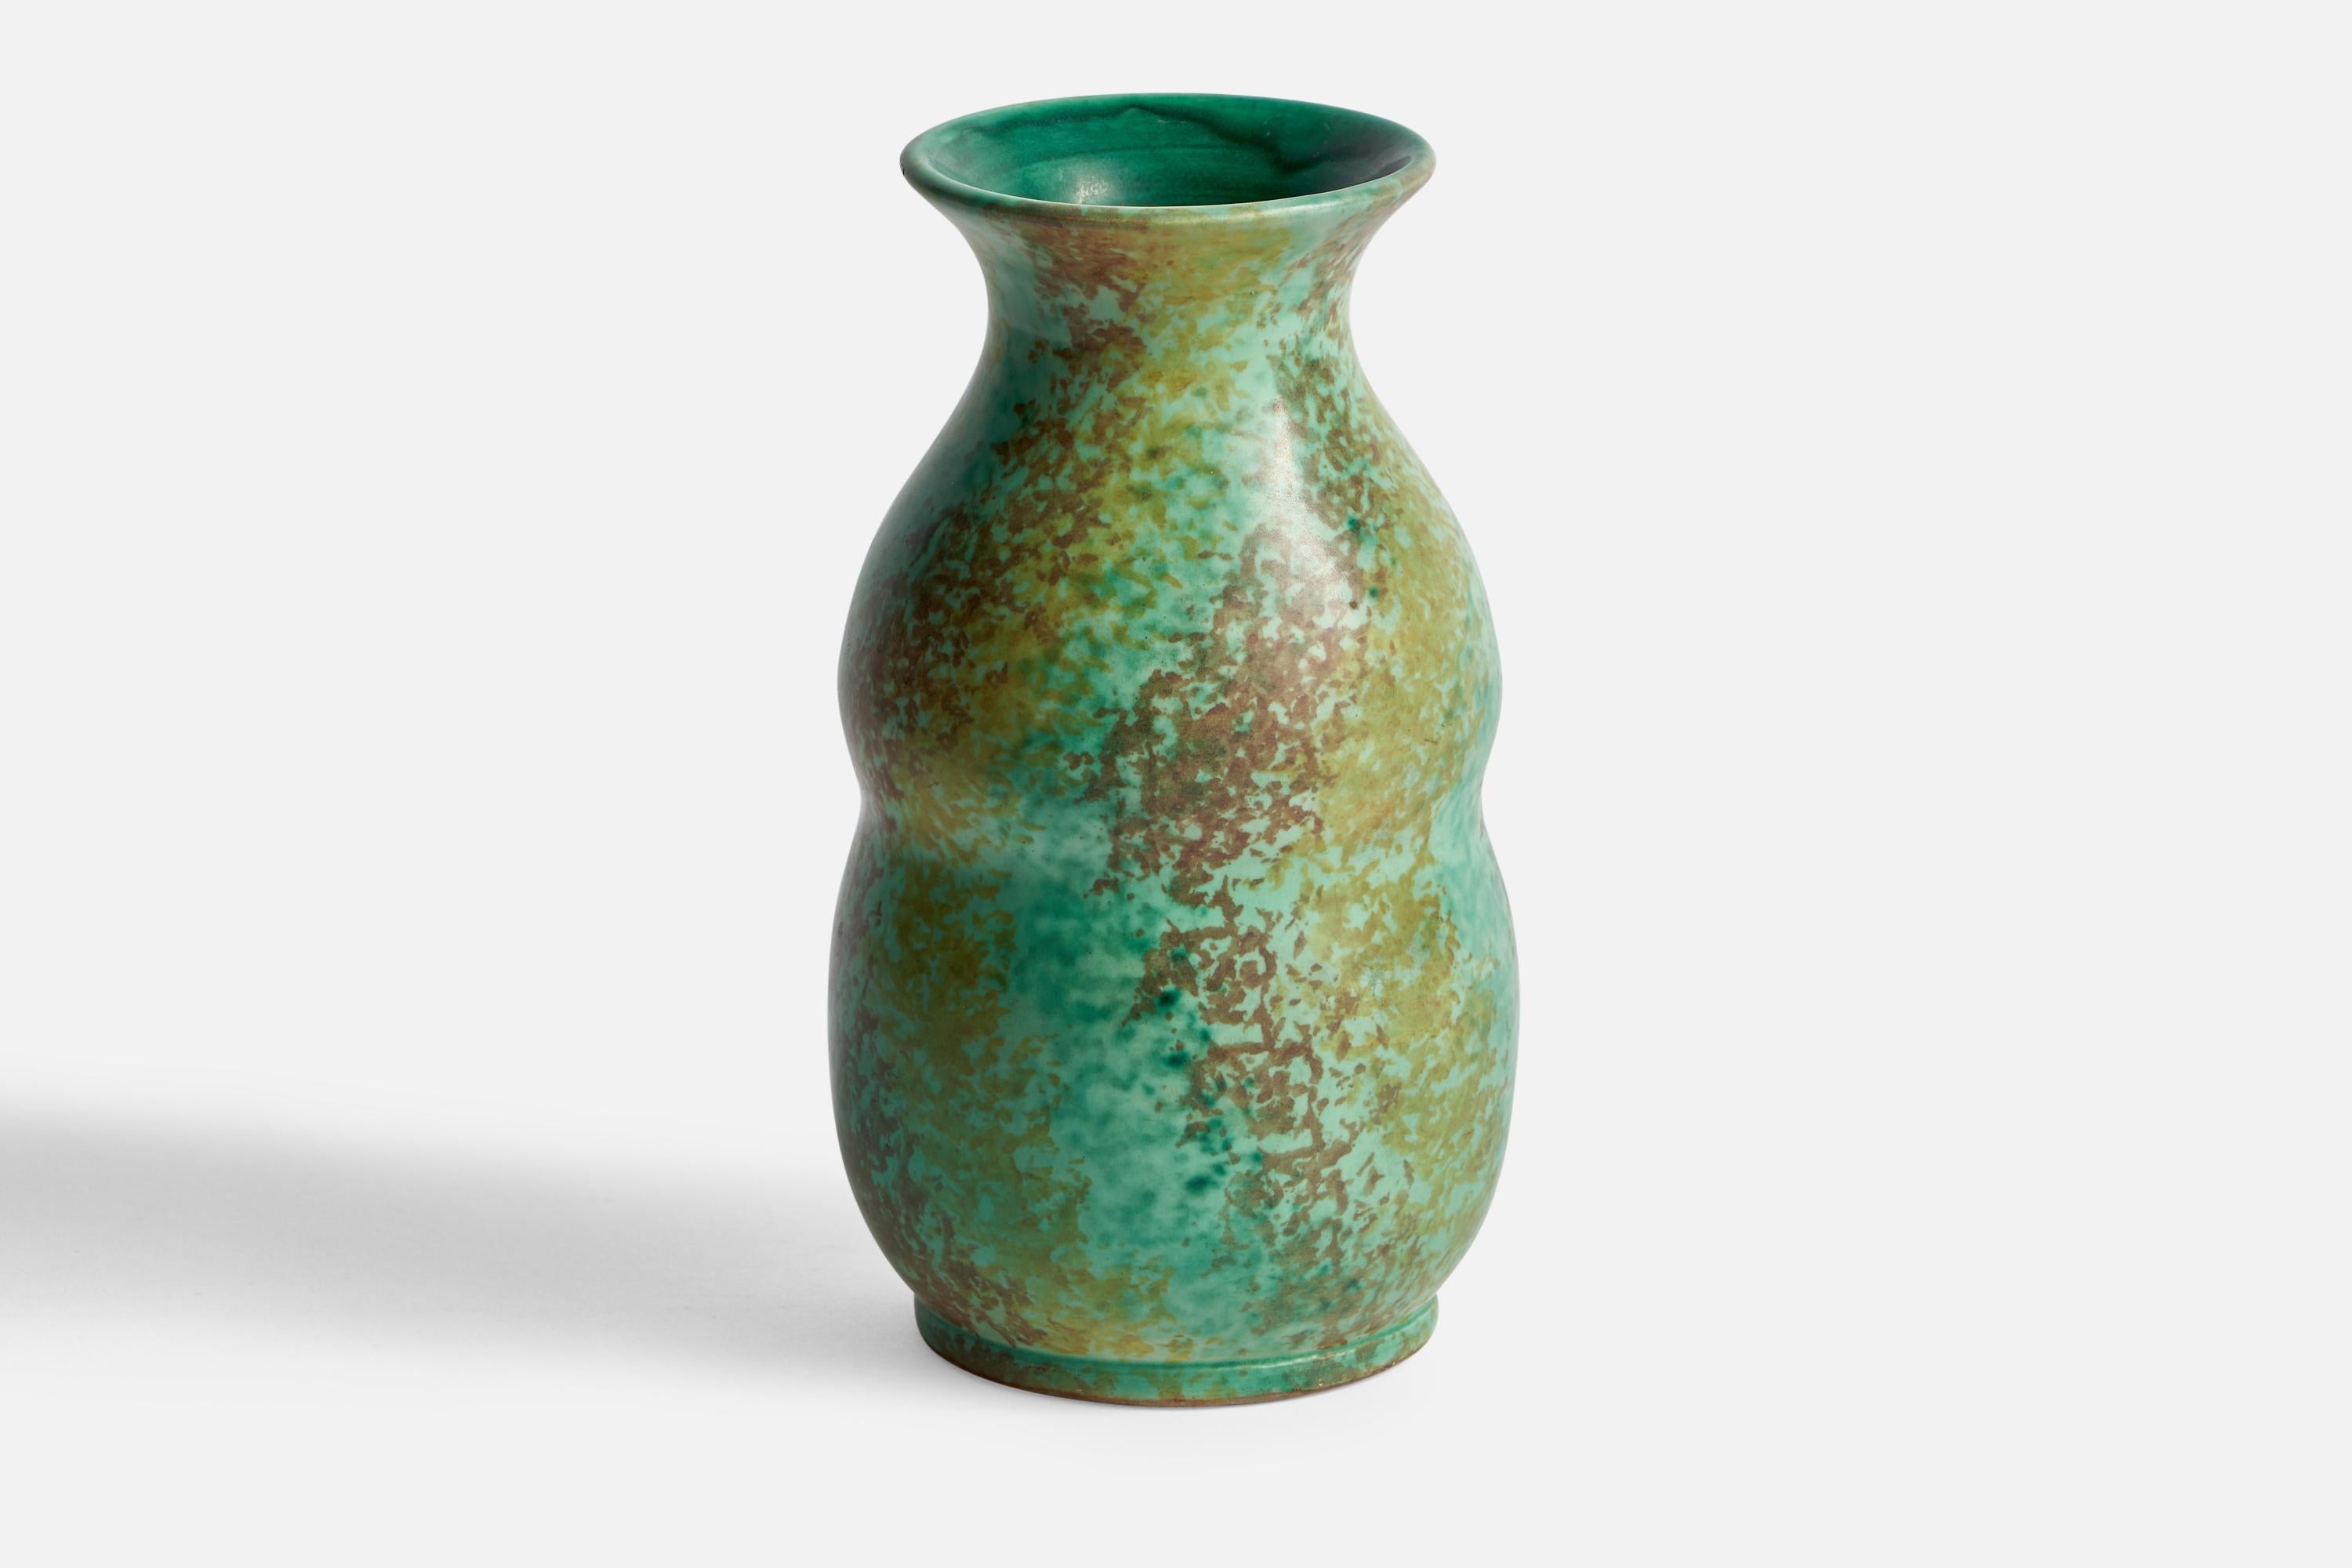 A green and brown-glazed ceramic vase designed and produced in Sweden, c. 1920s.